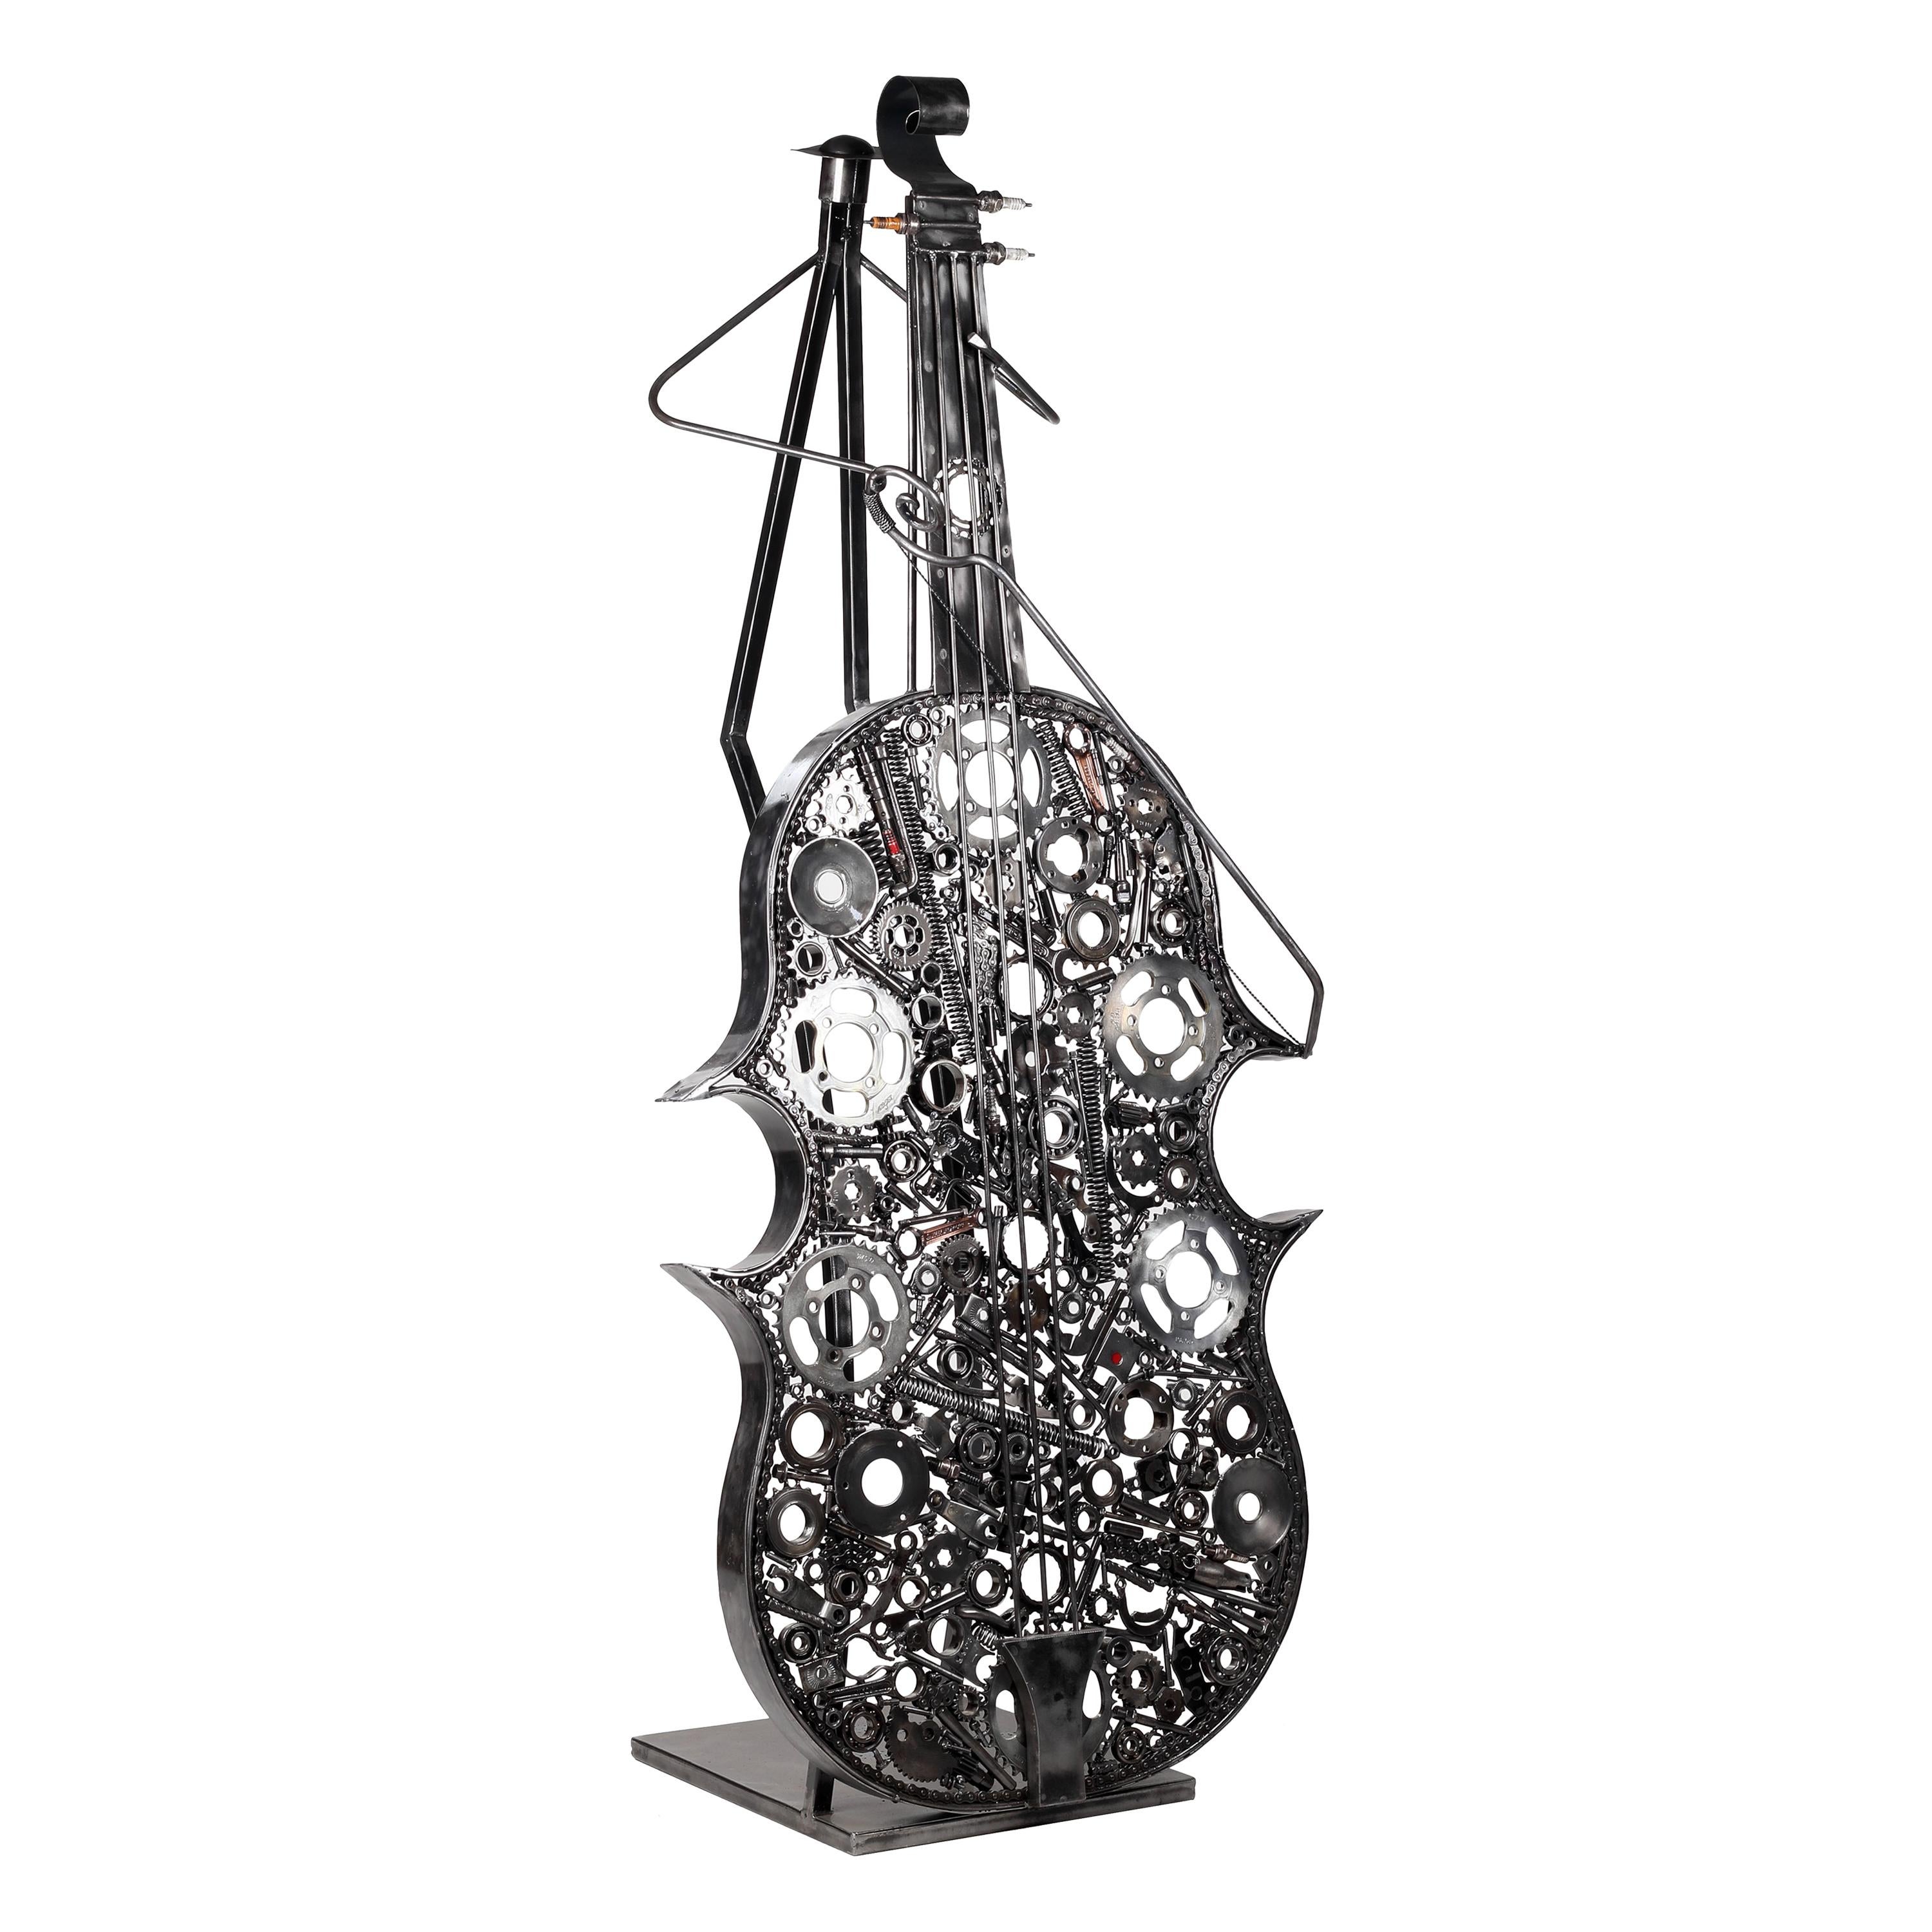 Iron Cello Sculpture Made by Hand with Recycled Motorcycle Parts